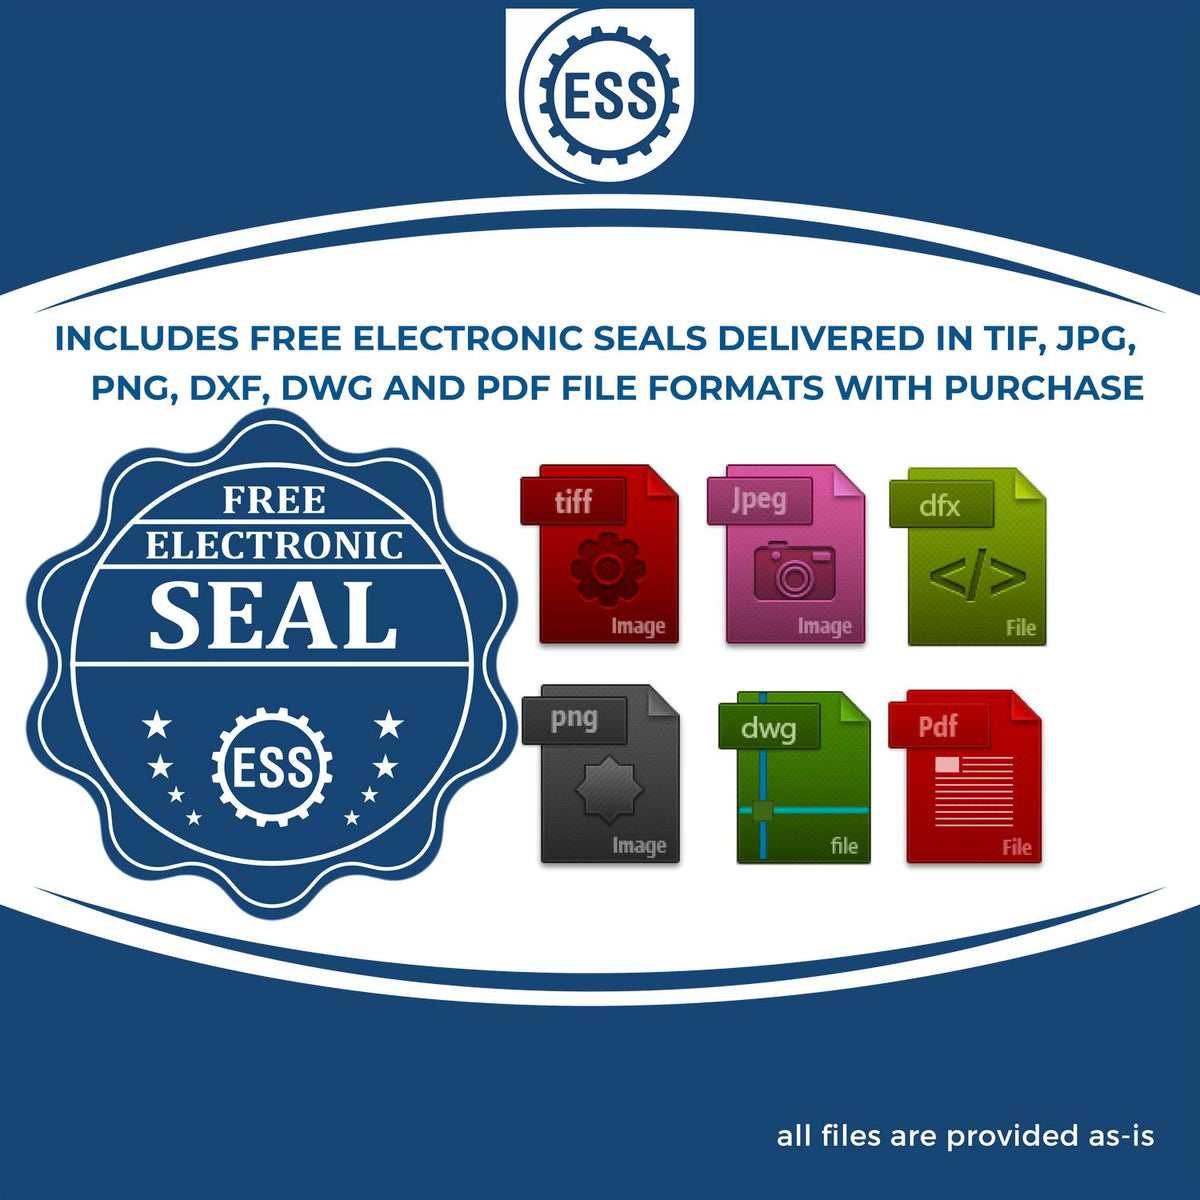 An infographic for the free electronic seal for the Soft Connecticut Professional Engineer Seal illustrating the different file type icons such as DXF, DWG, TIF, JPG and PNG.